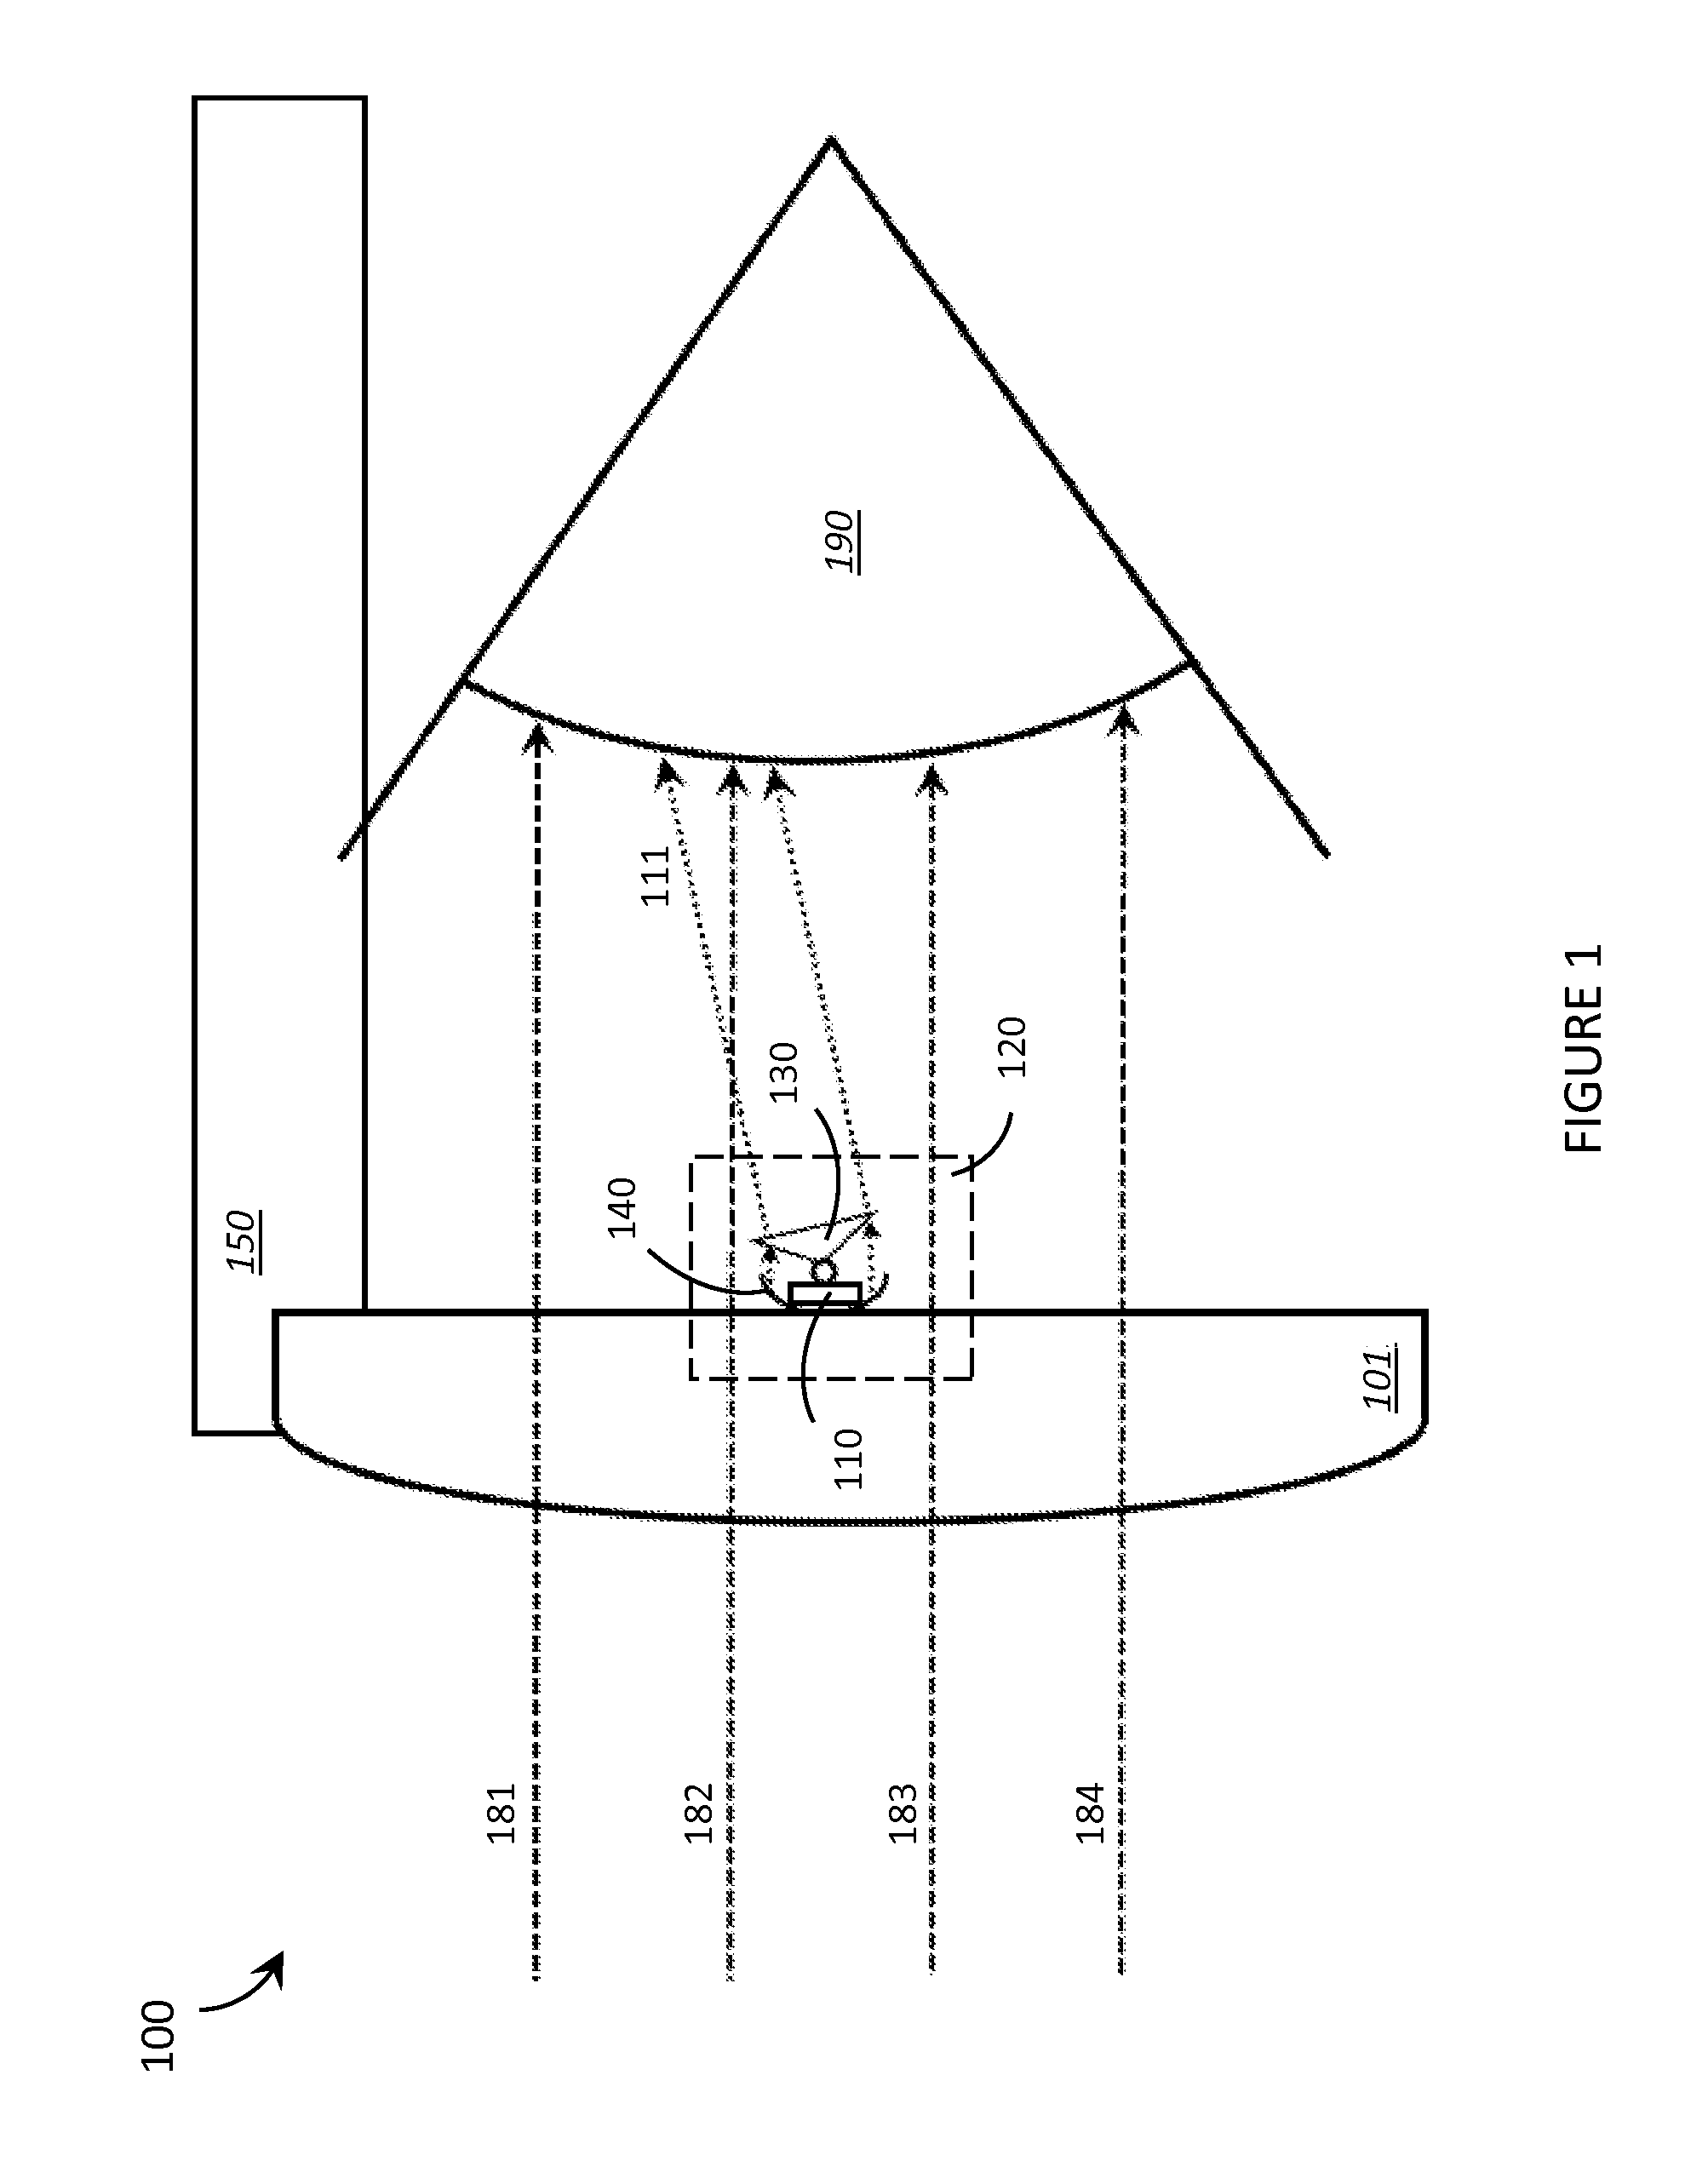 Systems, devices, and methods for wearable heads-up displays